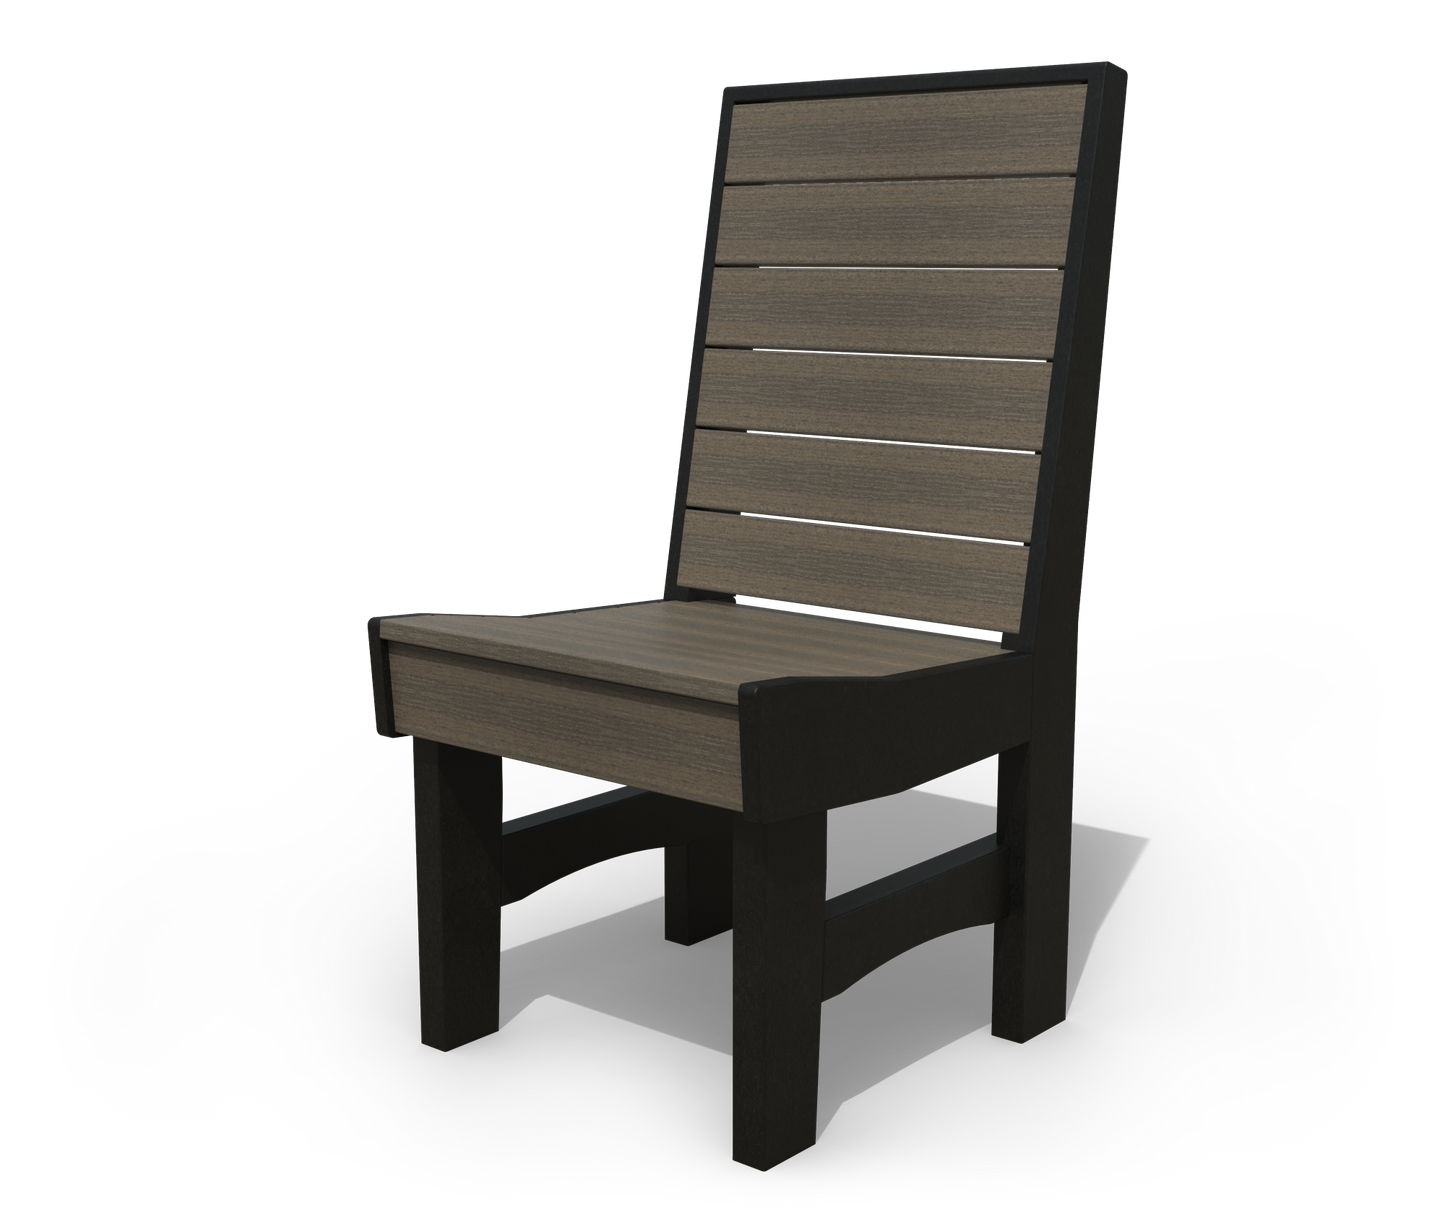 Patiova Recycled Plastic Coastal Dining Side Chair - LEAD TIME TO SHIP 3 WEEKS